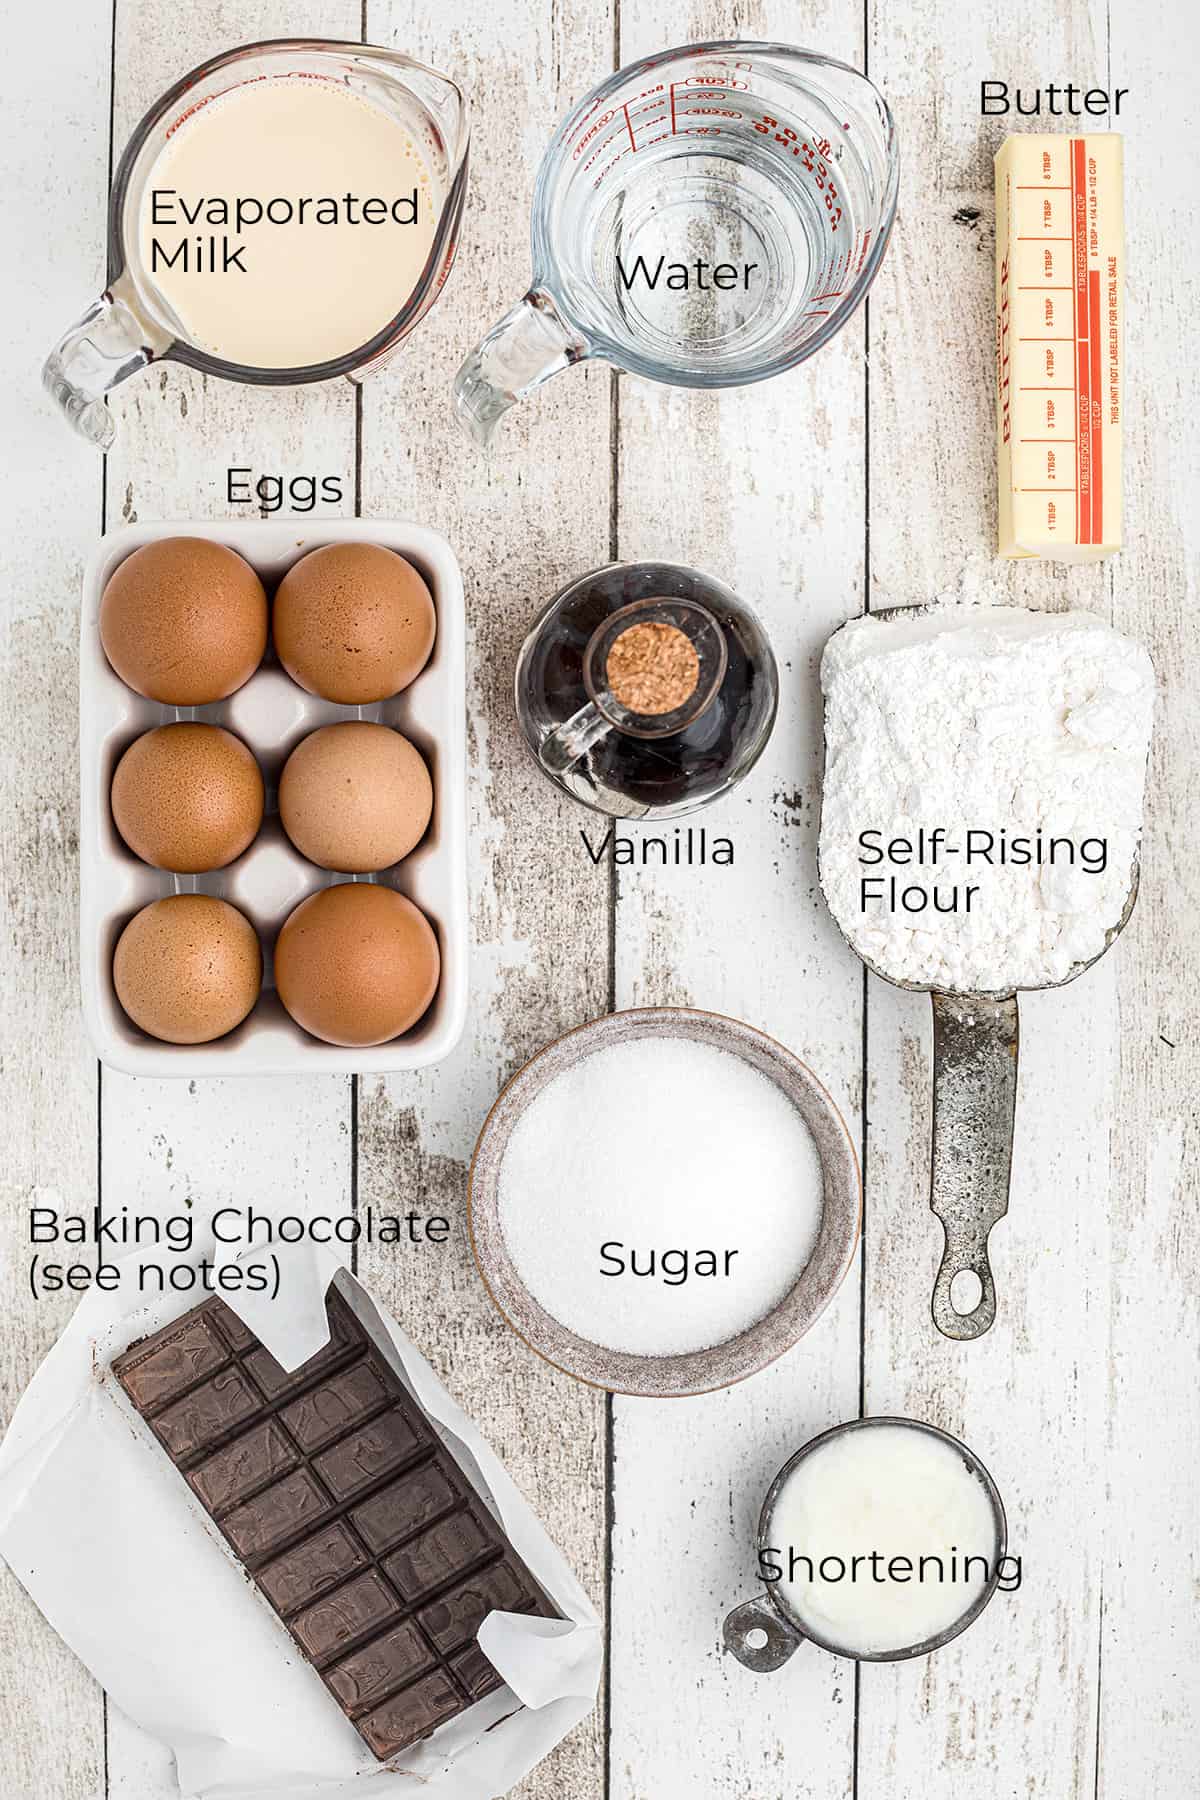 All ingredients needed to make chocolate little layer cake.